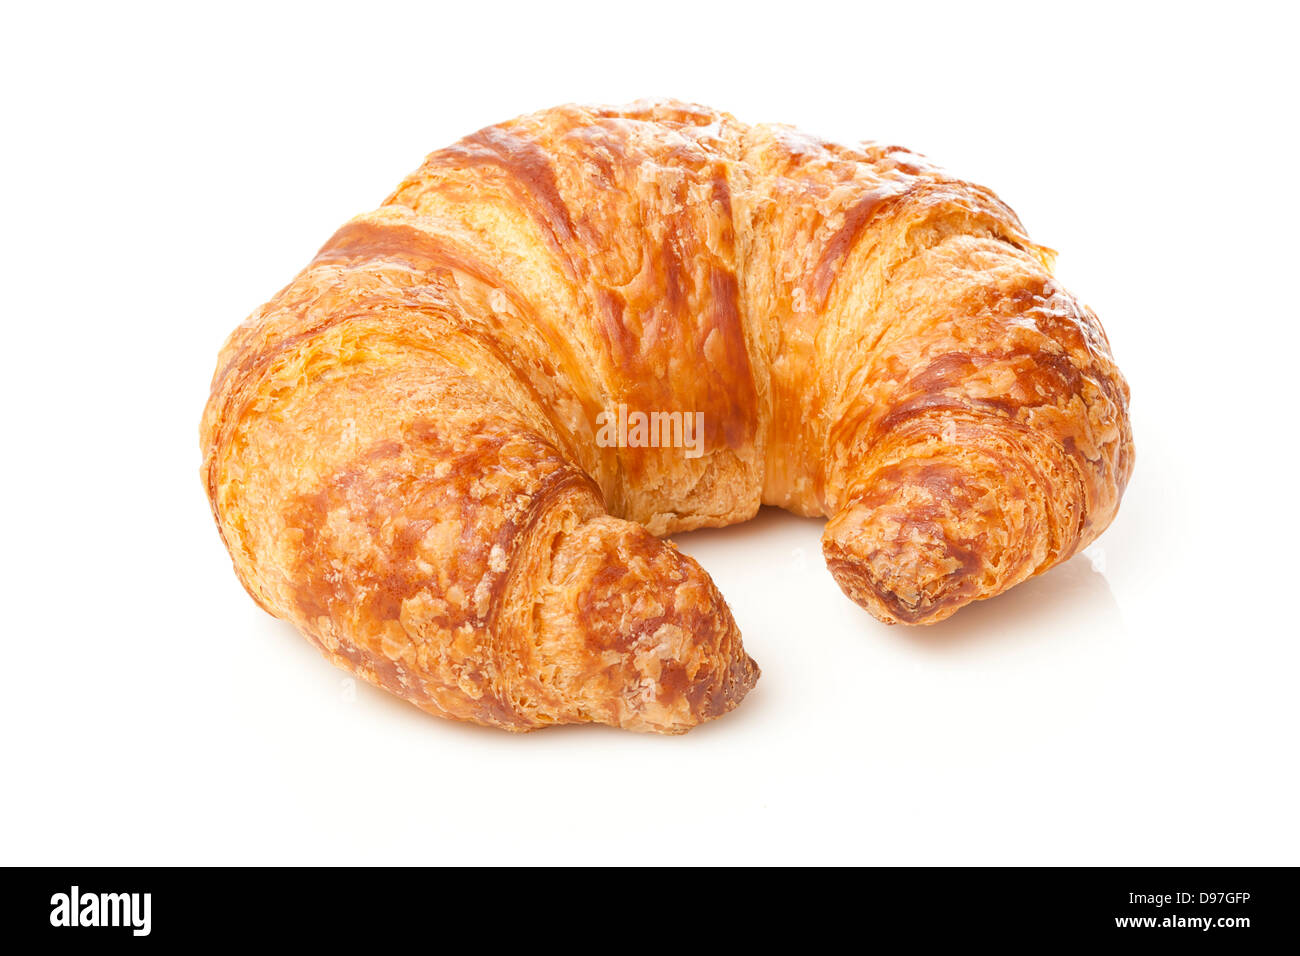 A Freshly Baked Croissant made for breakfast Stock Photo